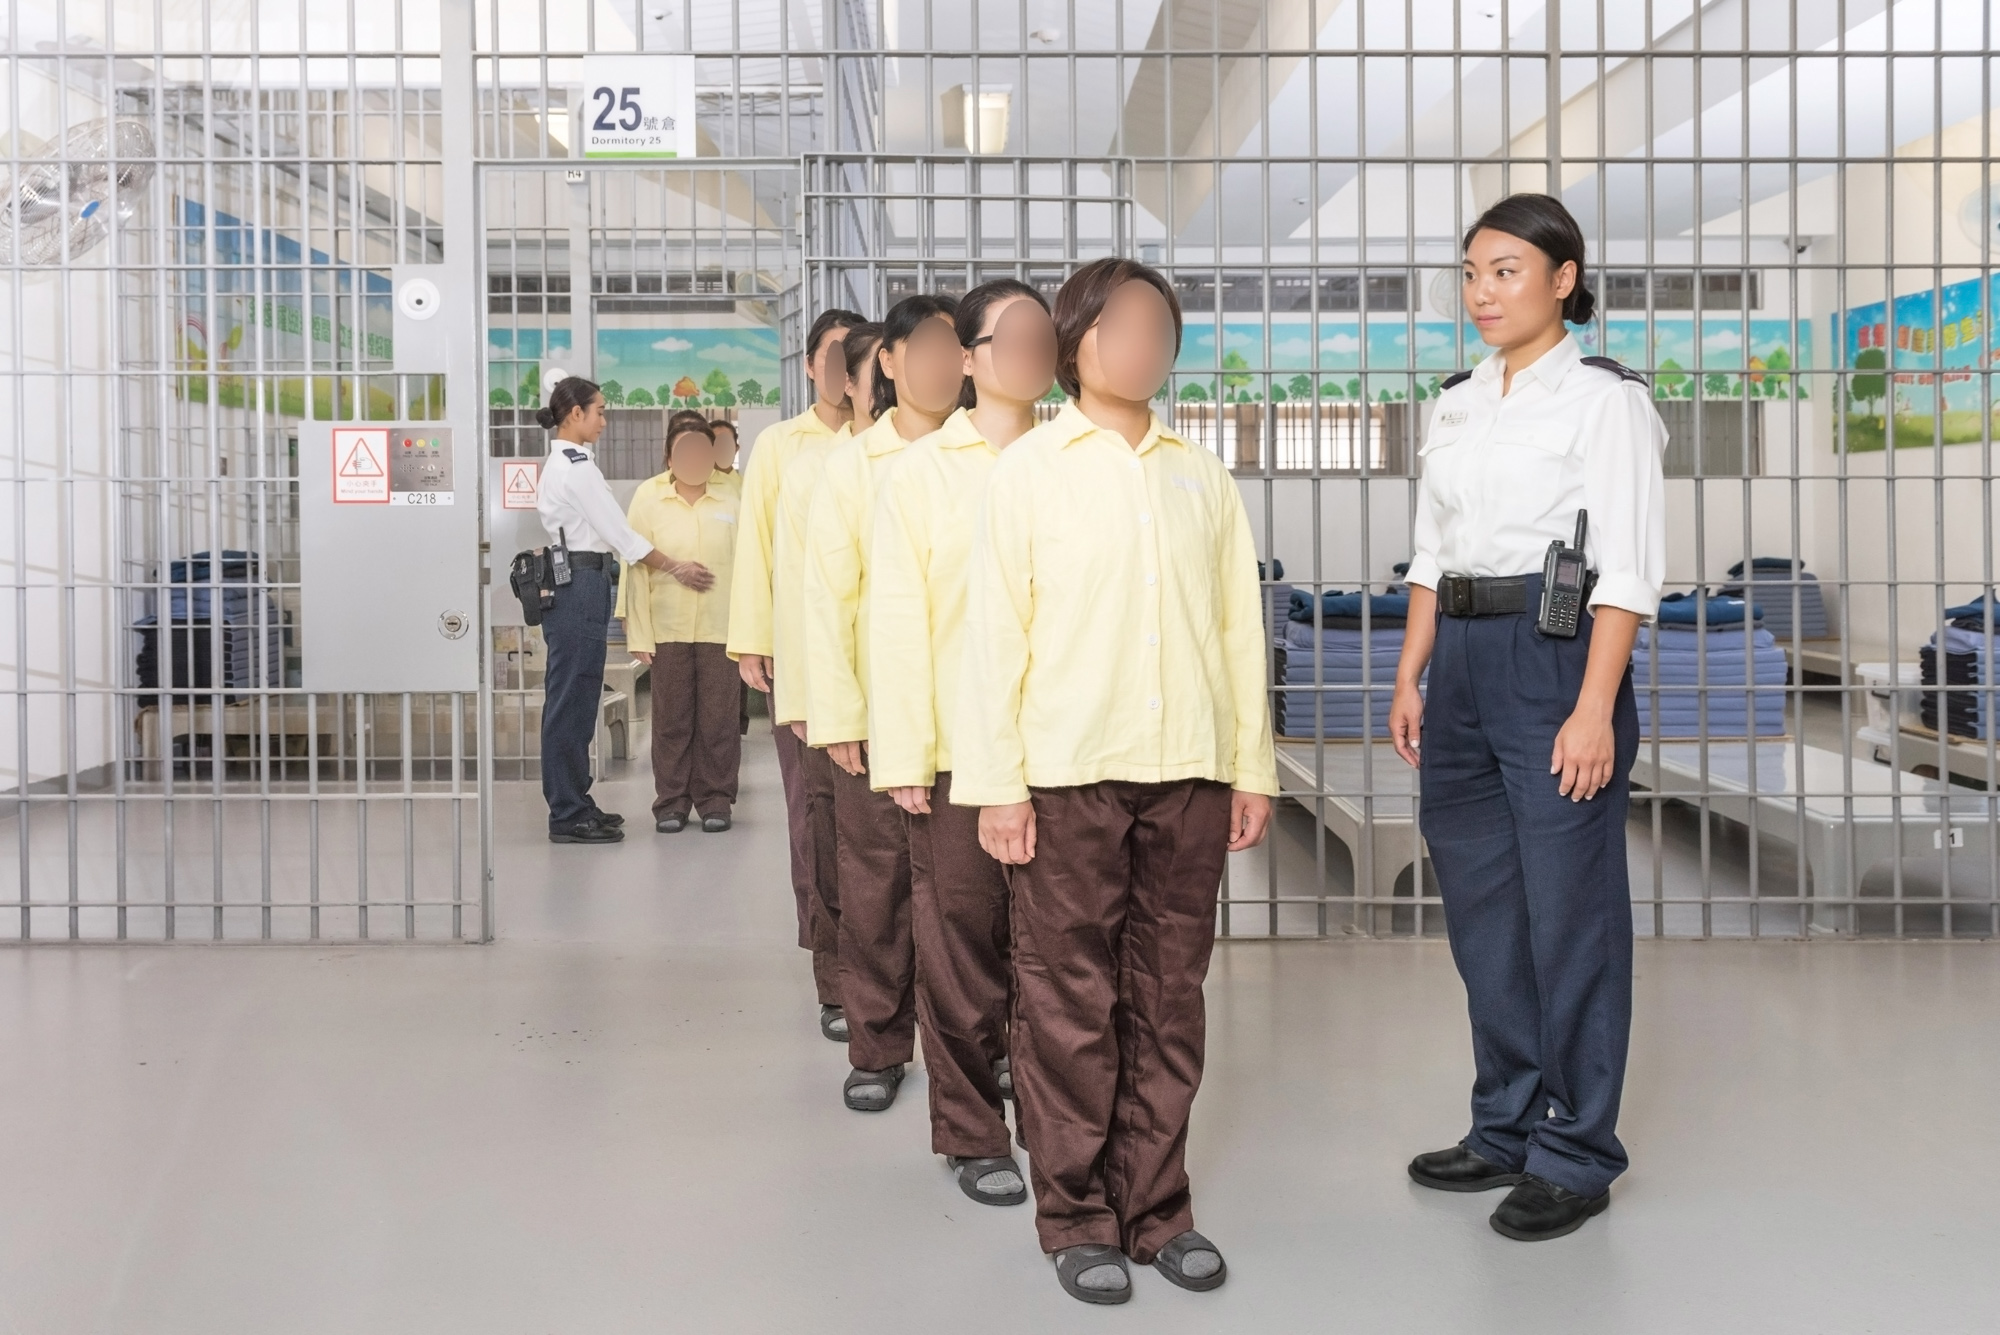 Correctional staff manage persons in custody for the purpose of maintaining order of correctional institutions.